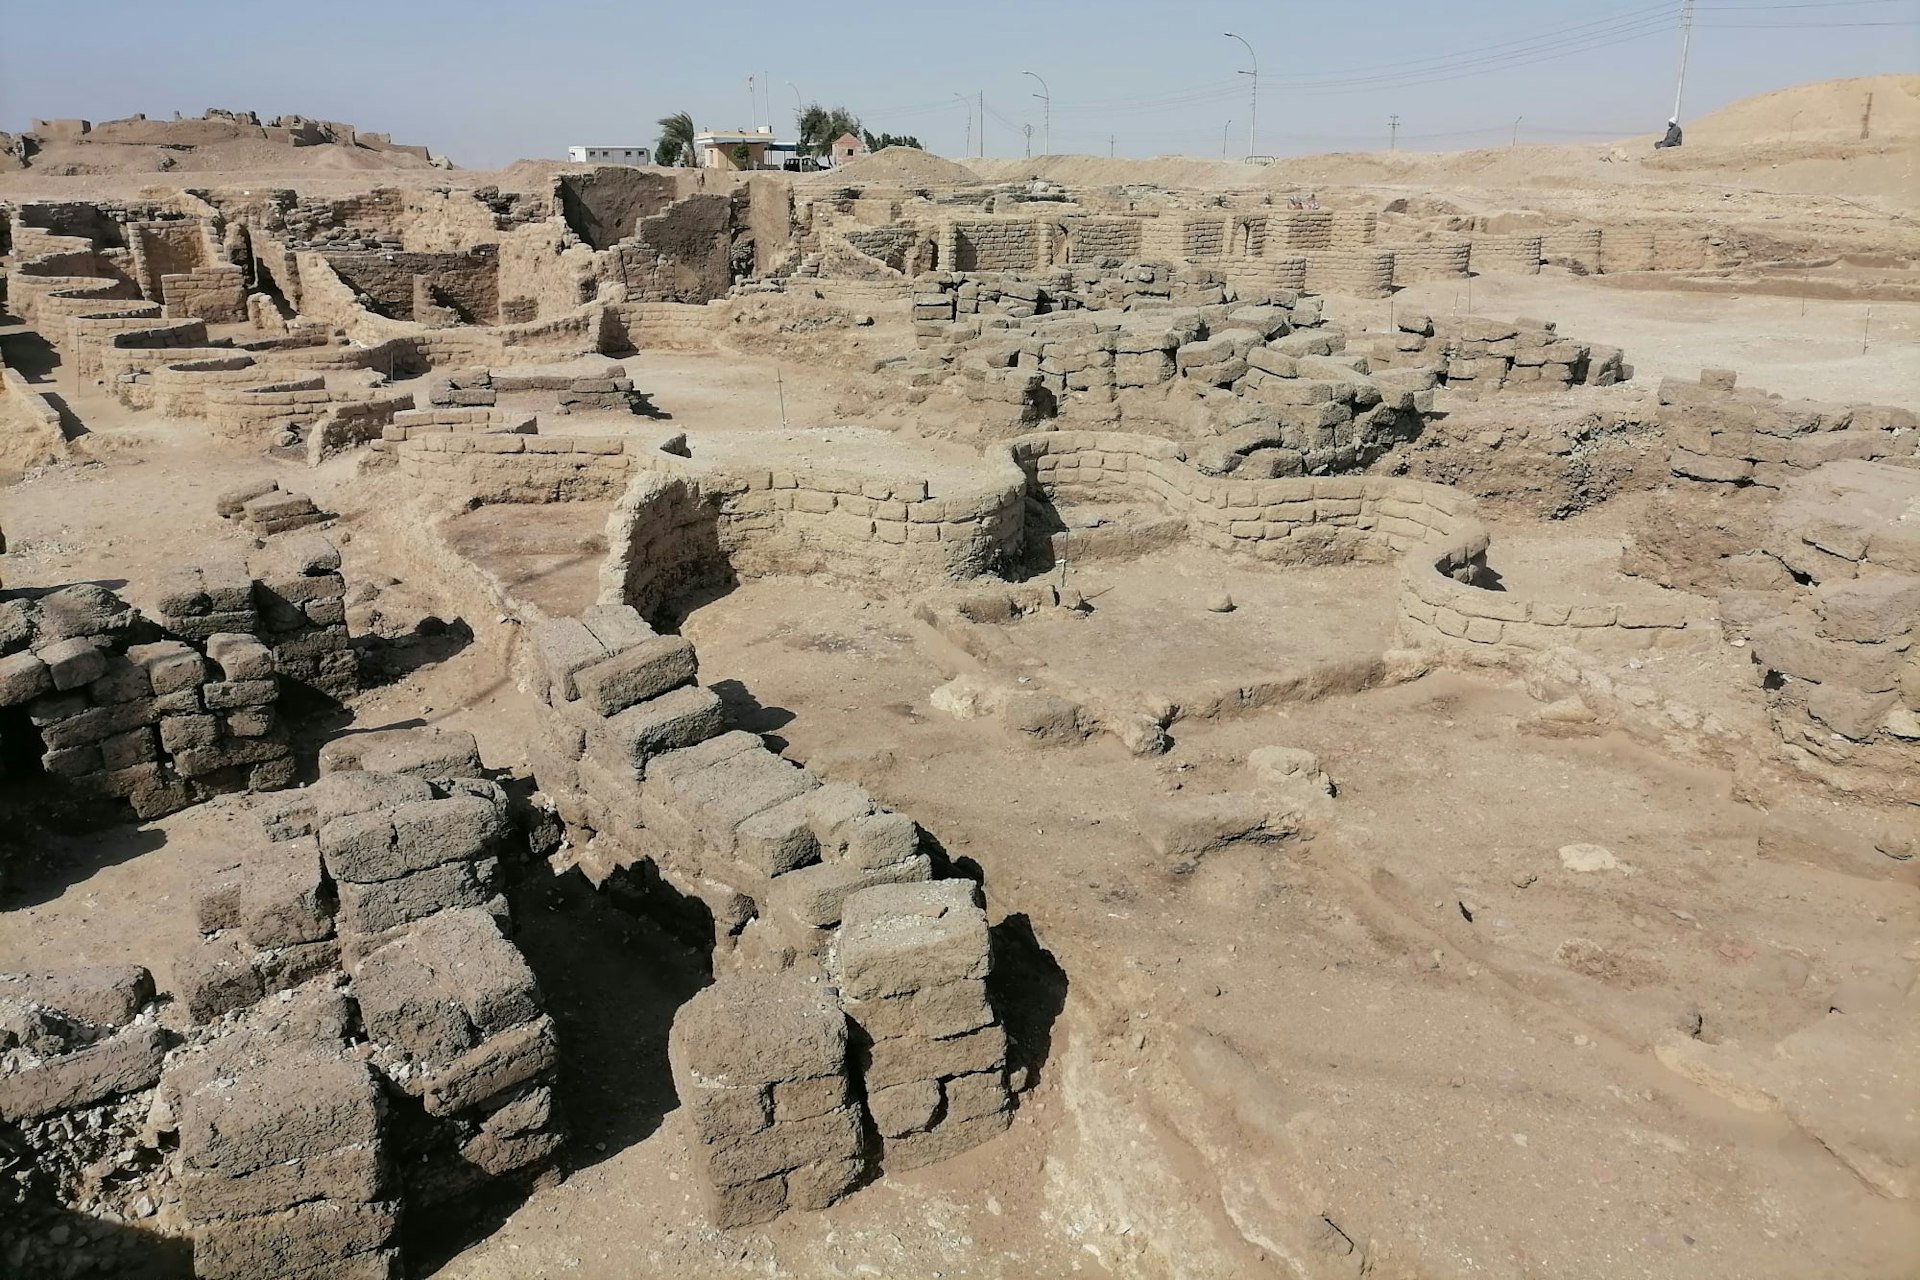 Ruins of the Palace of the Dazzling Aten in Egypt